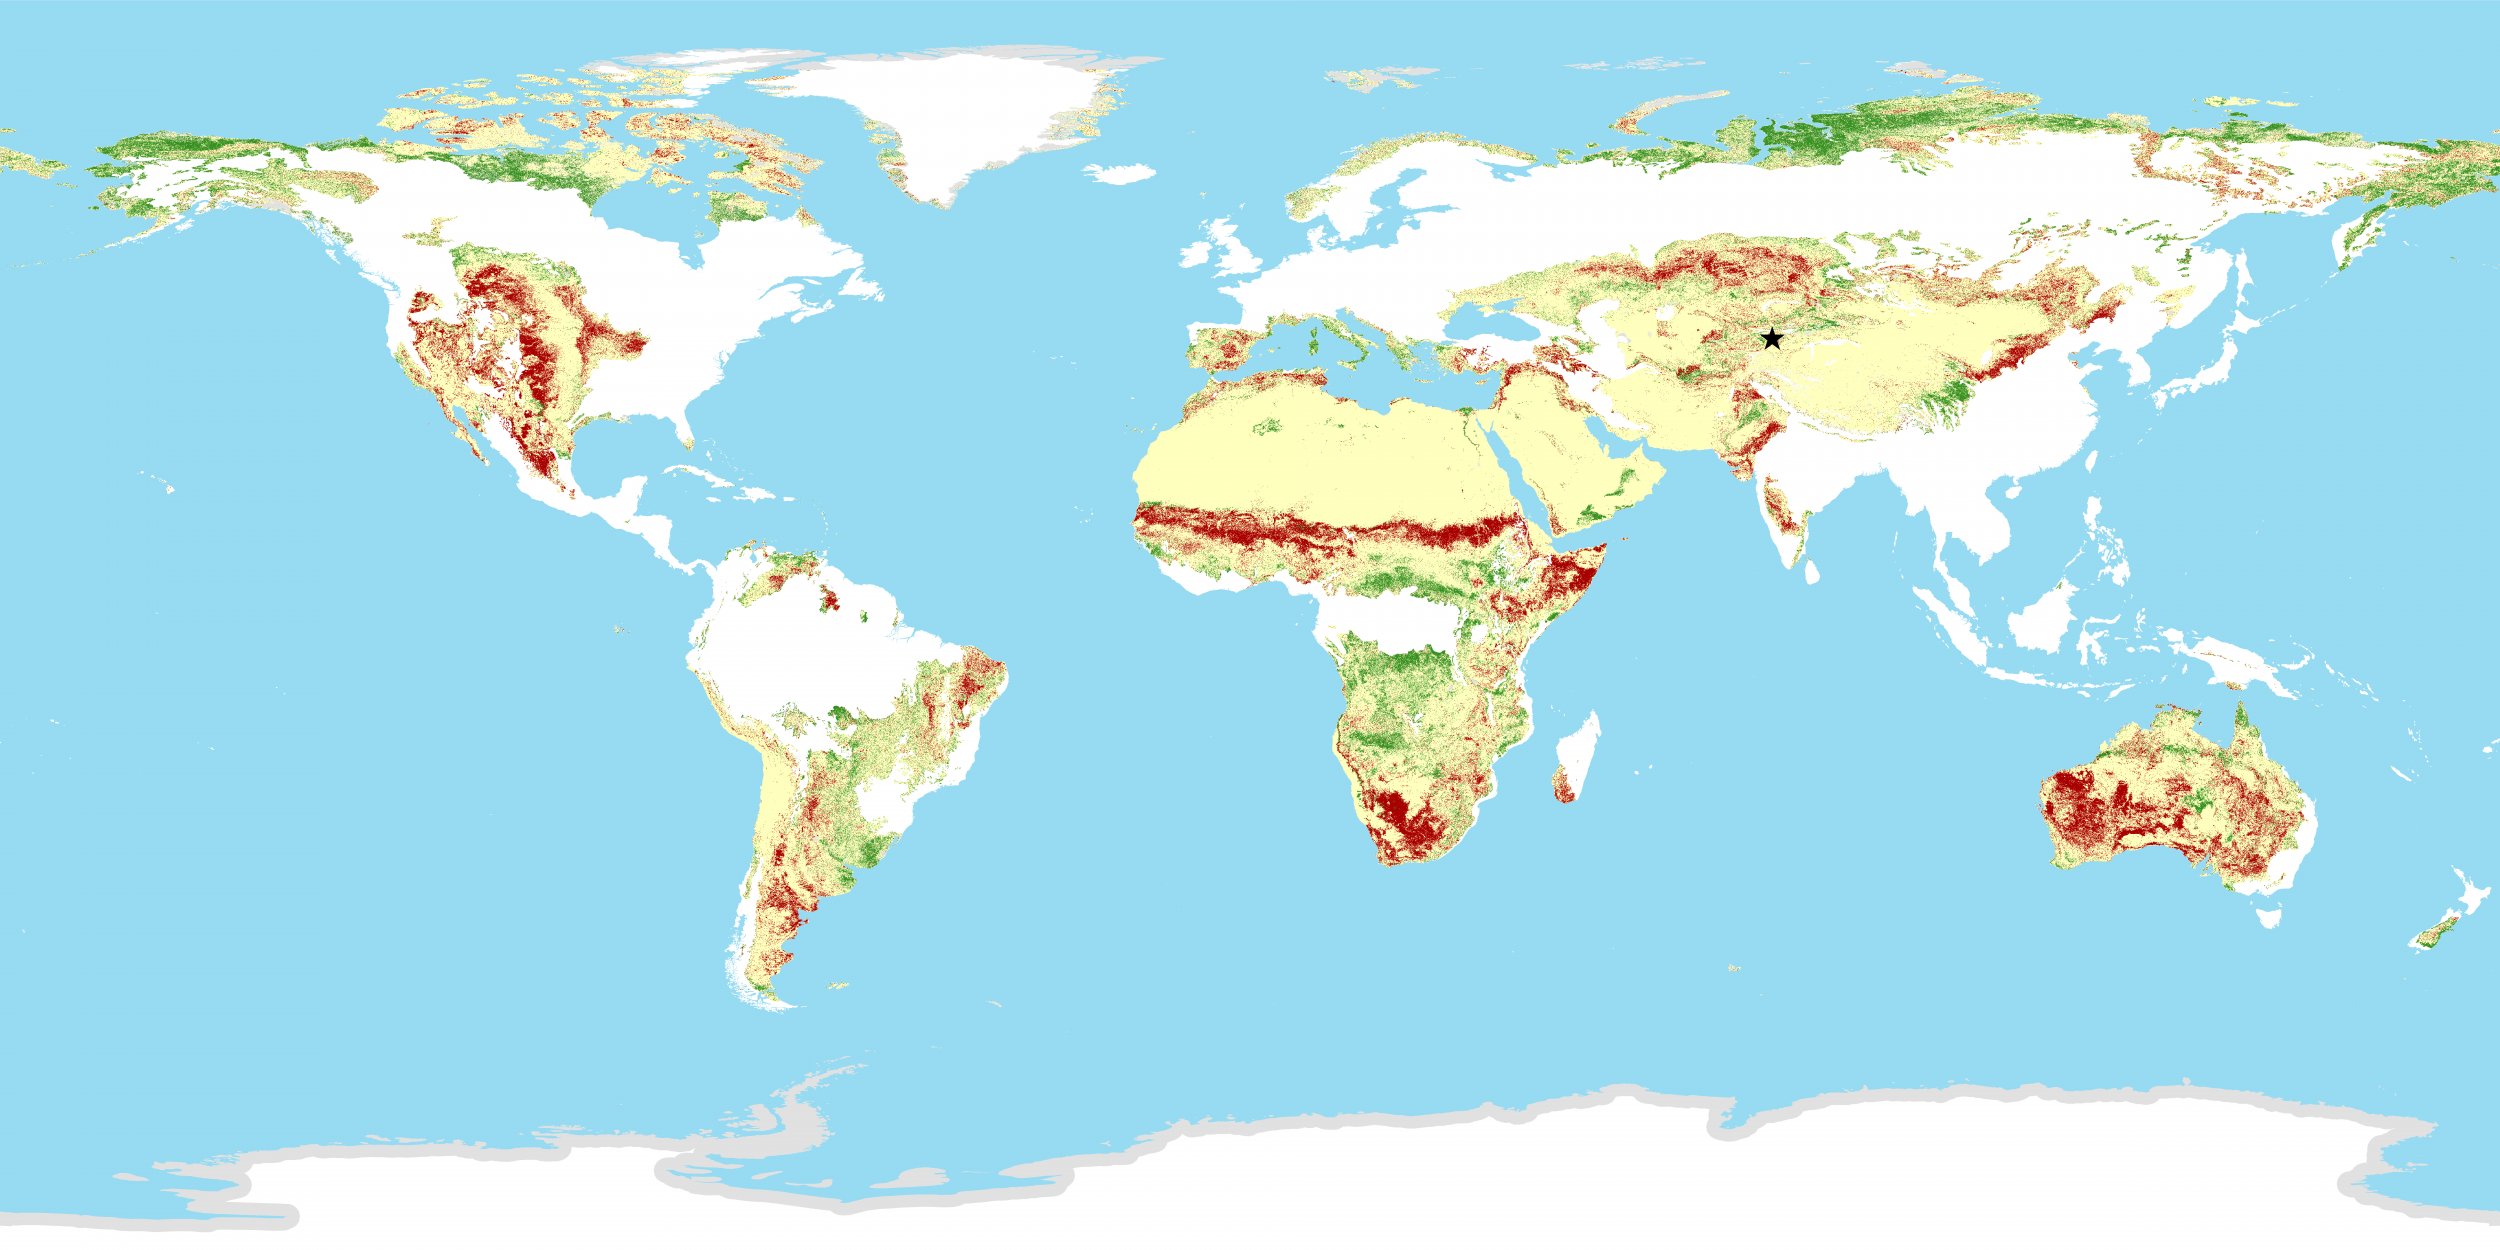 Land productivity performance over the period 2001-2015 in rangelands